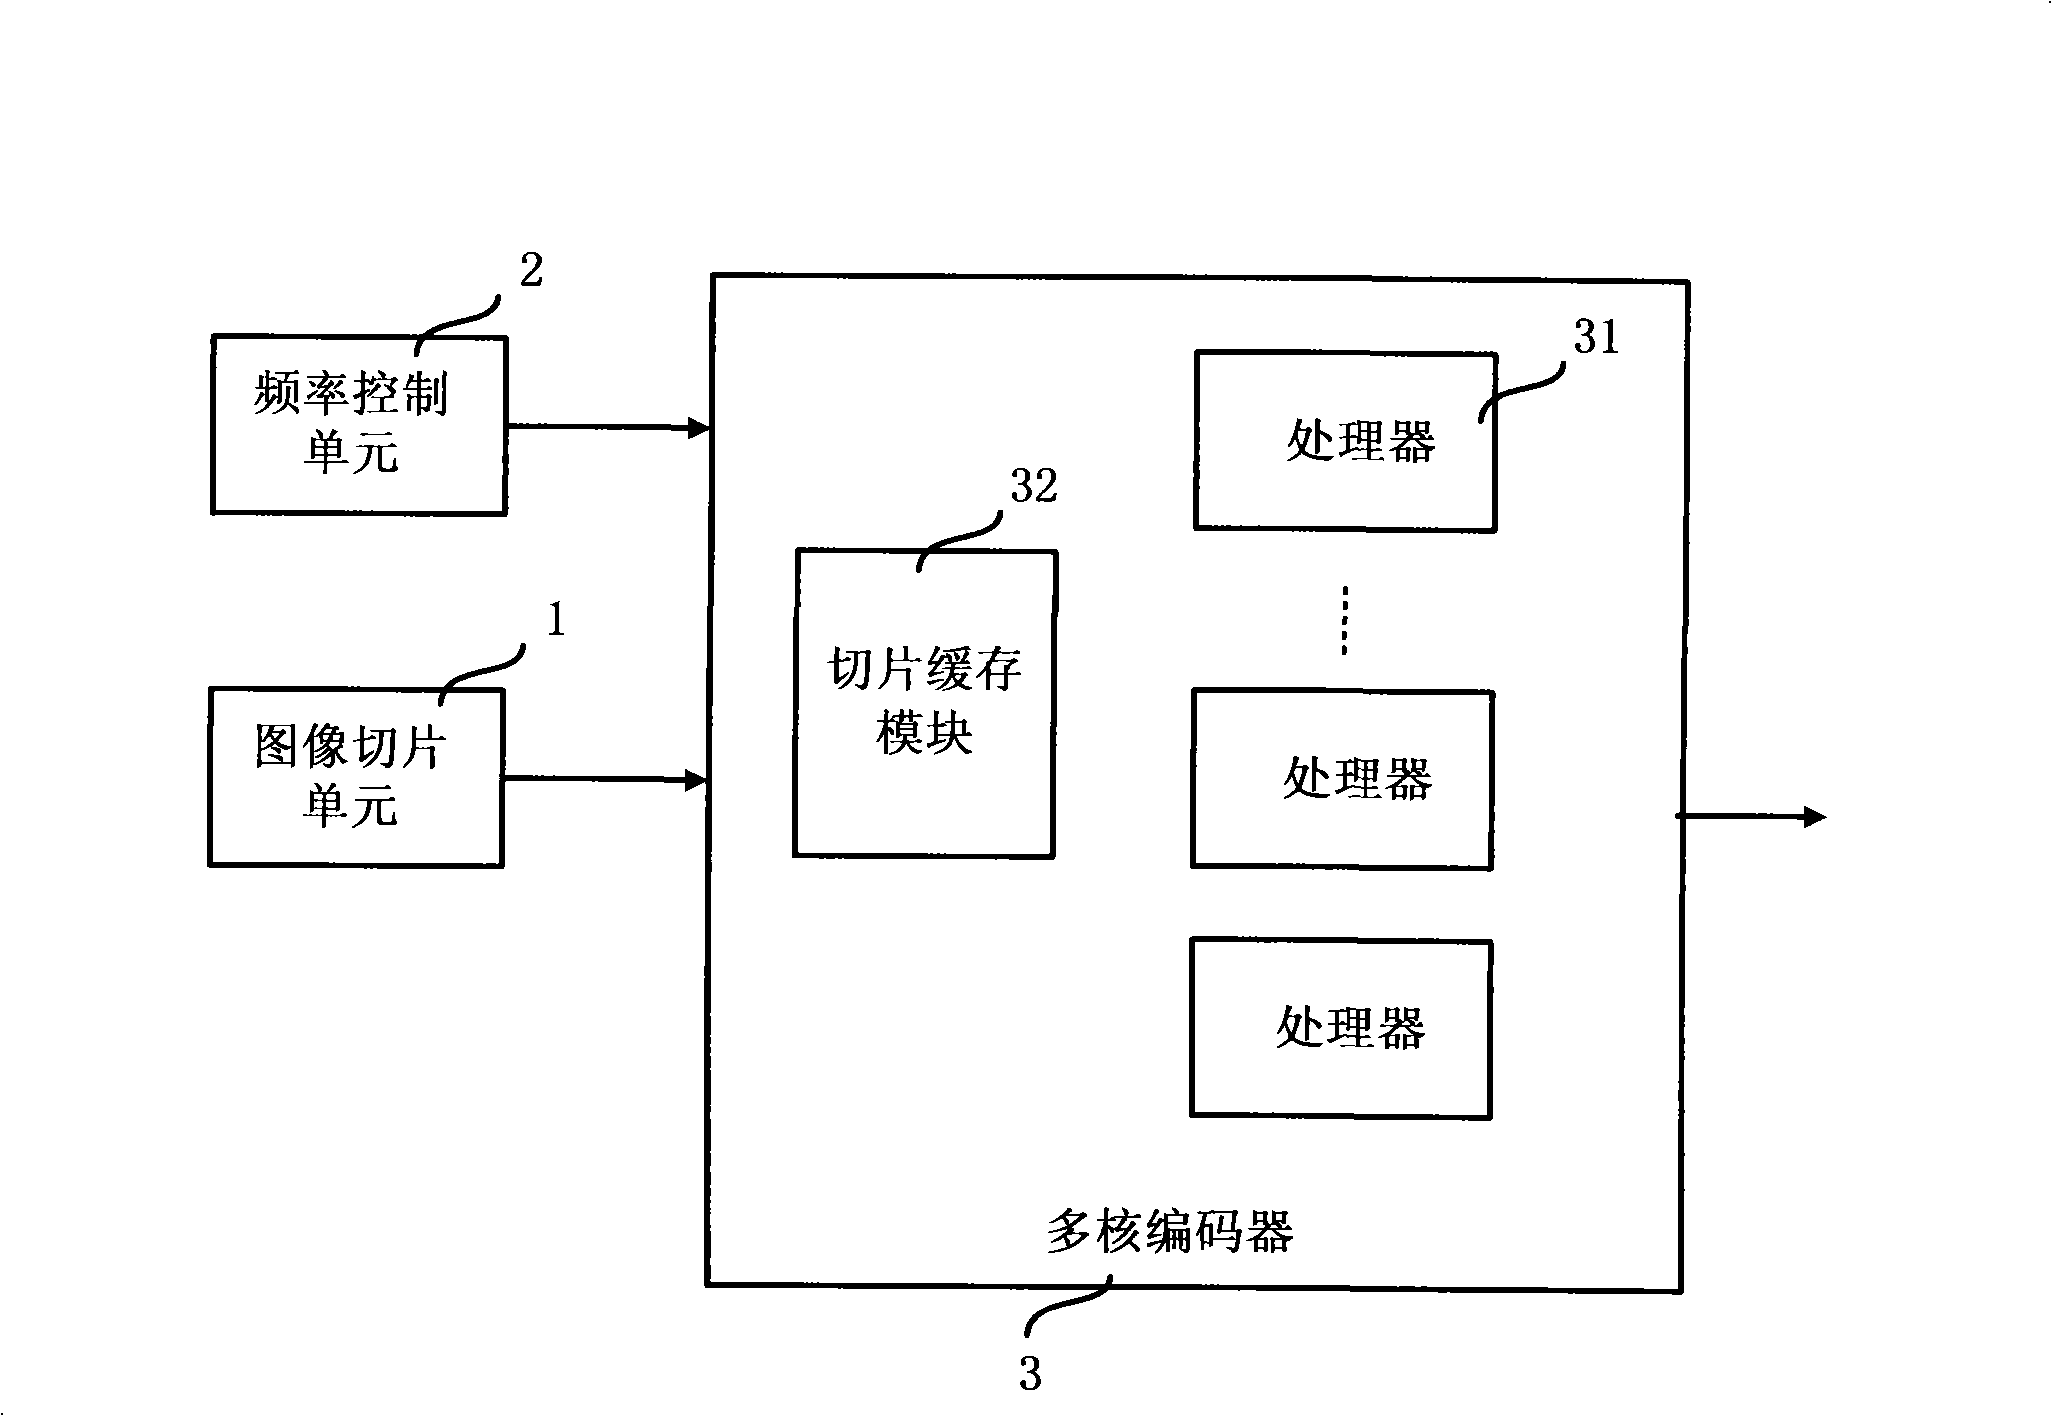 A multi-processor video coding chip device and method